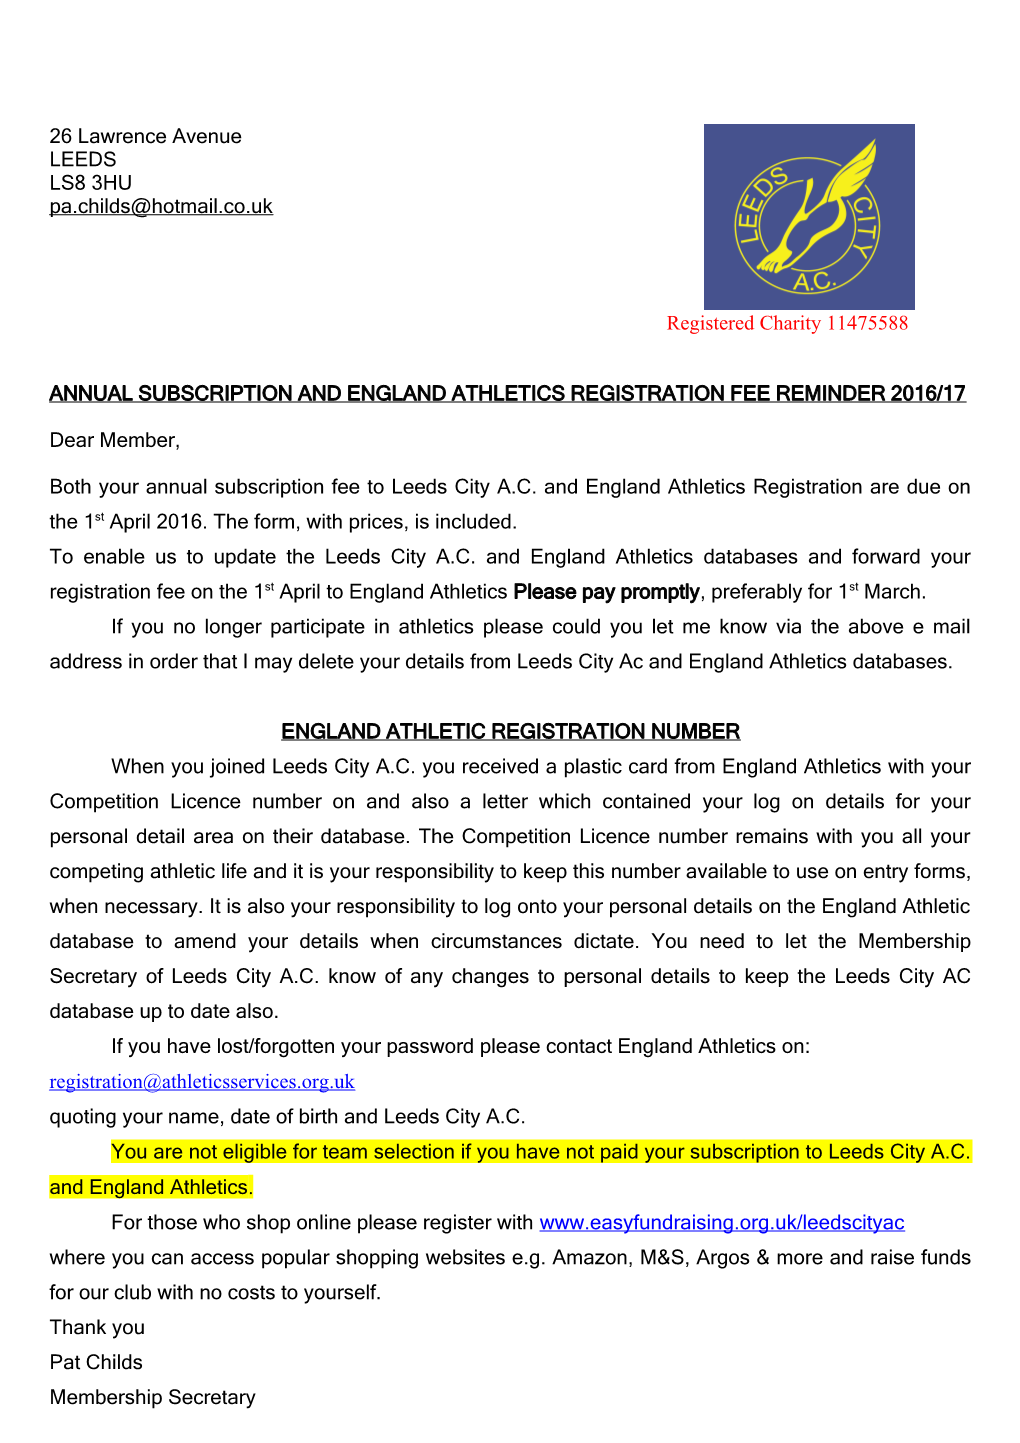 Annual Subscription and England Athletics Registration Fee Reminder 2016/17